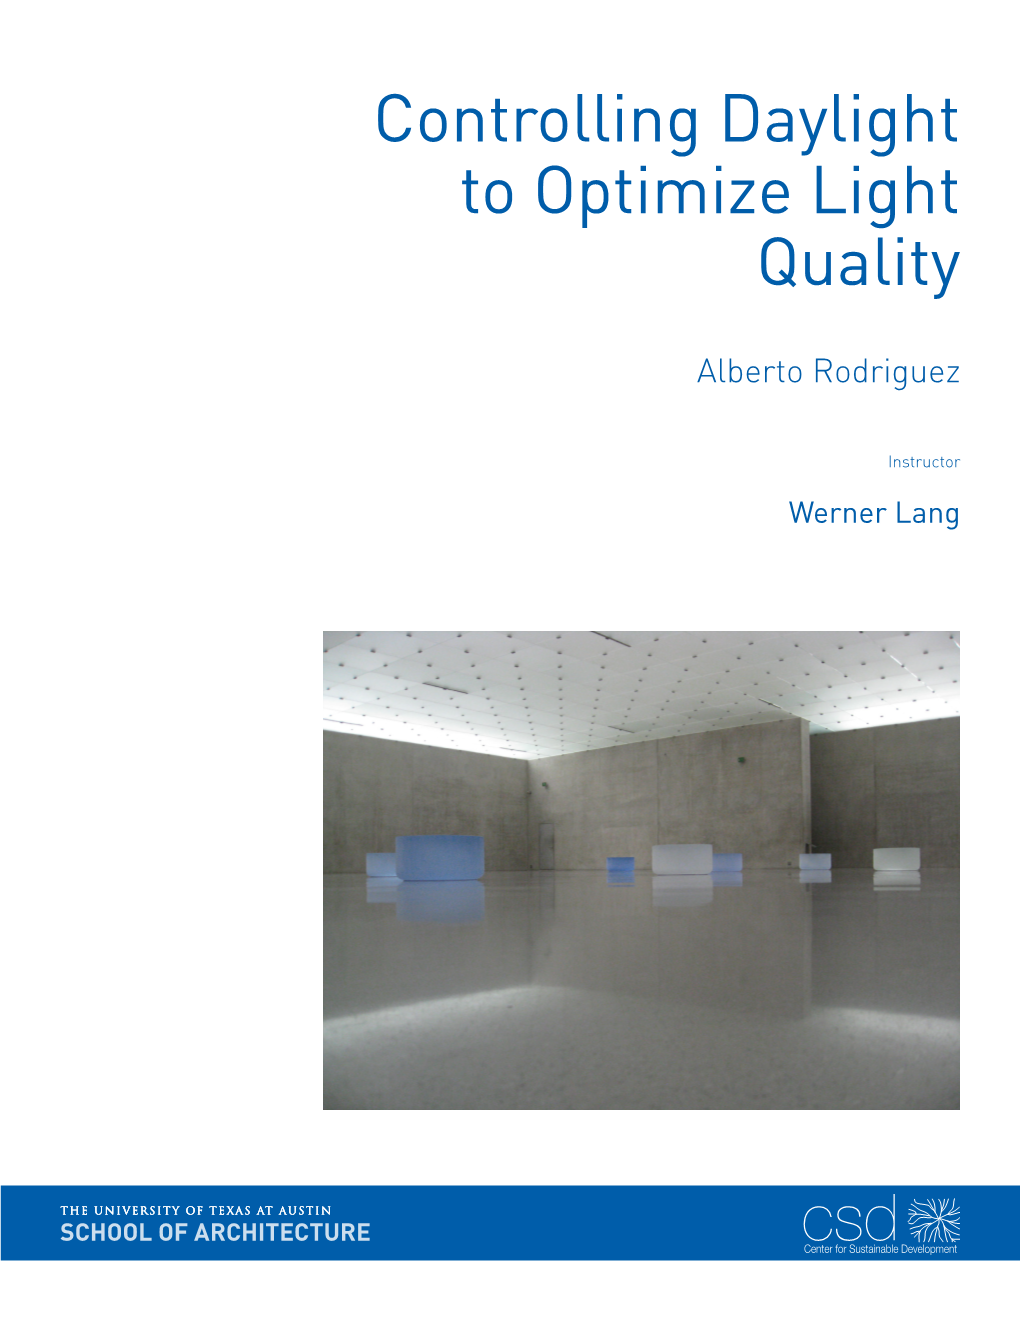 Controlling Daylight to Optimize Light Quality